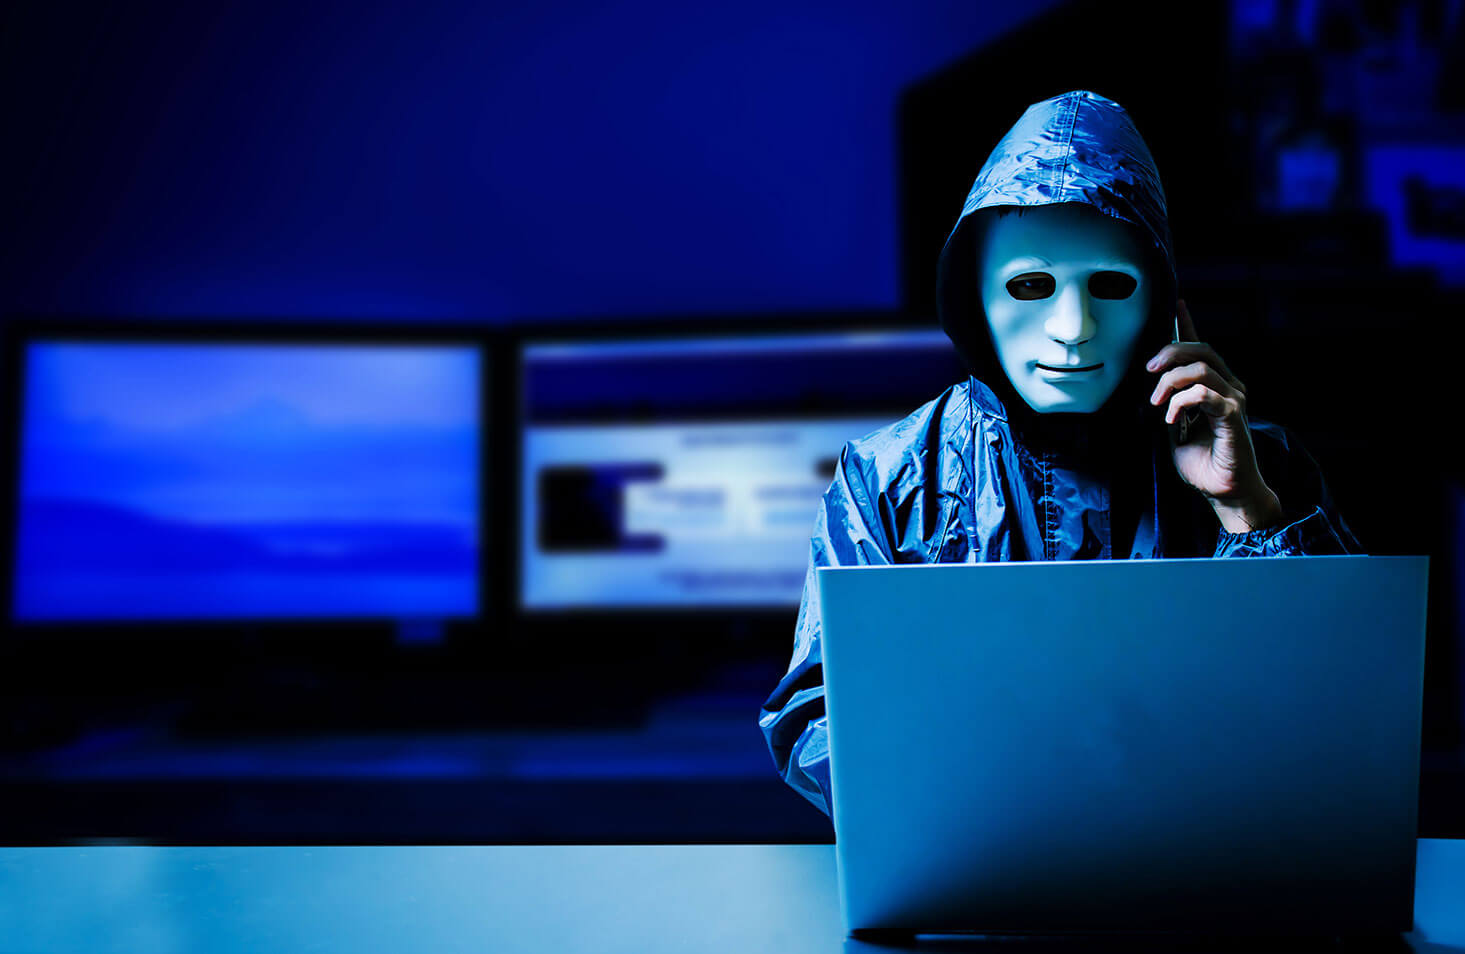 a man wearing a hooded jacket and with a sculpted mask over his face speaks on a phone while looking at a laptop in a dark room